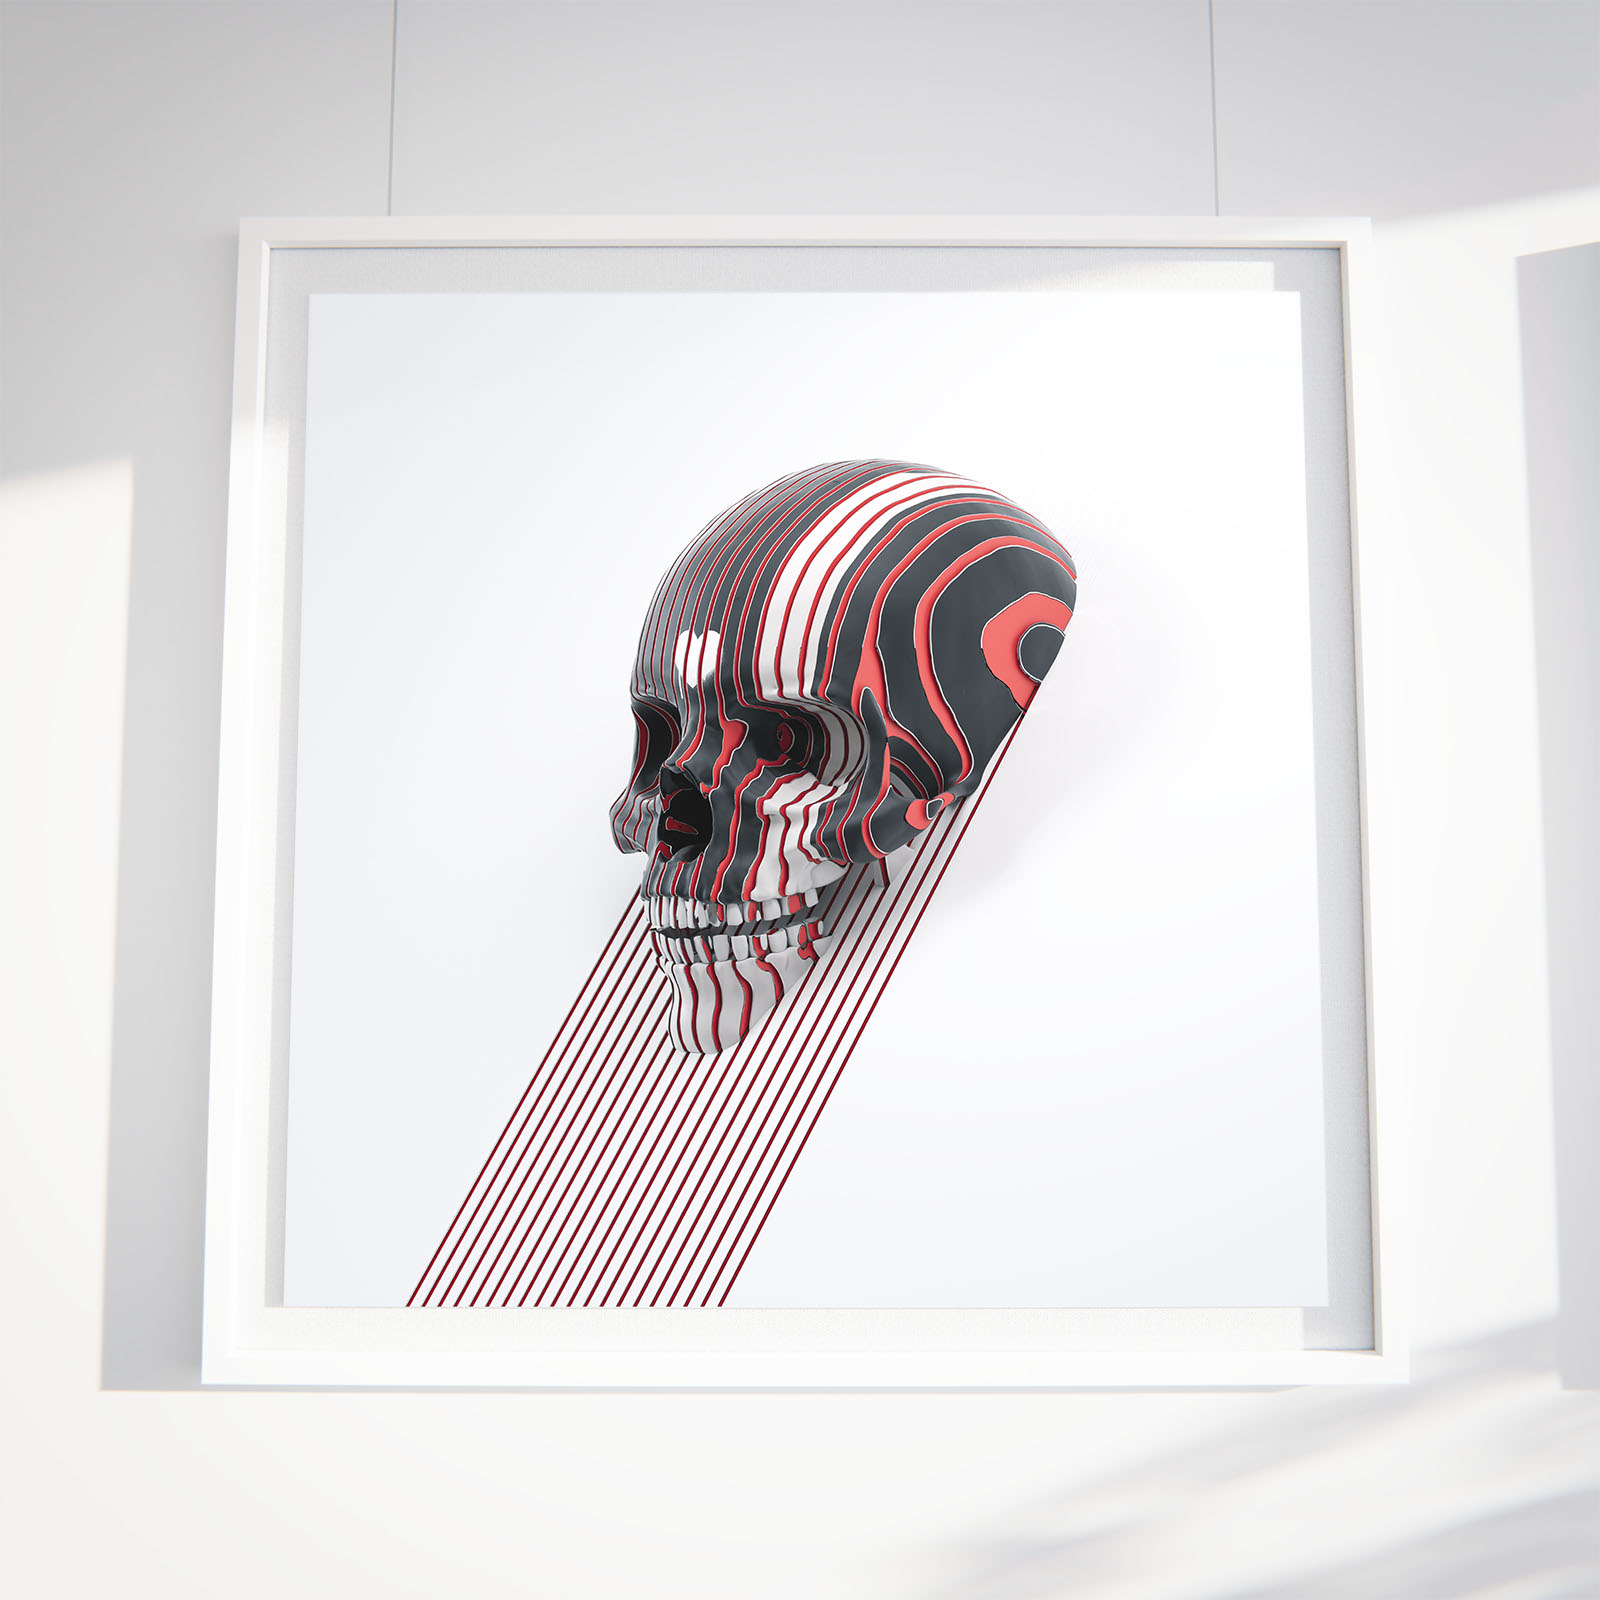 Division - Art Gallery Prints